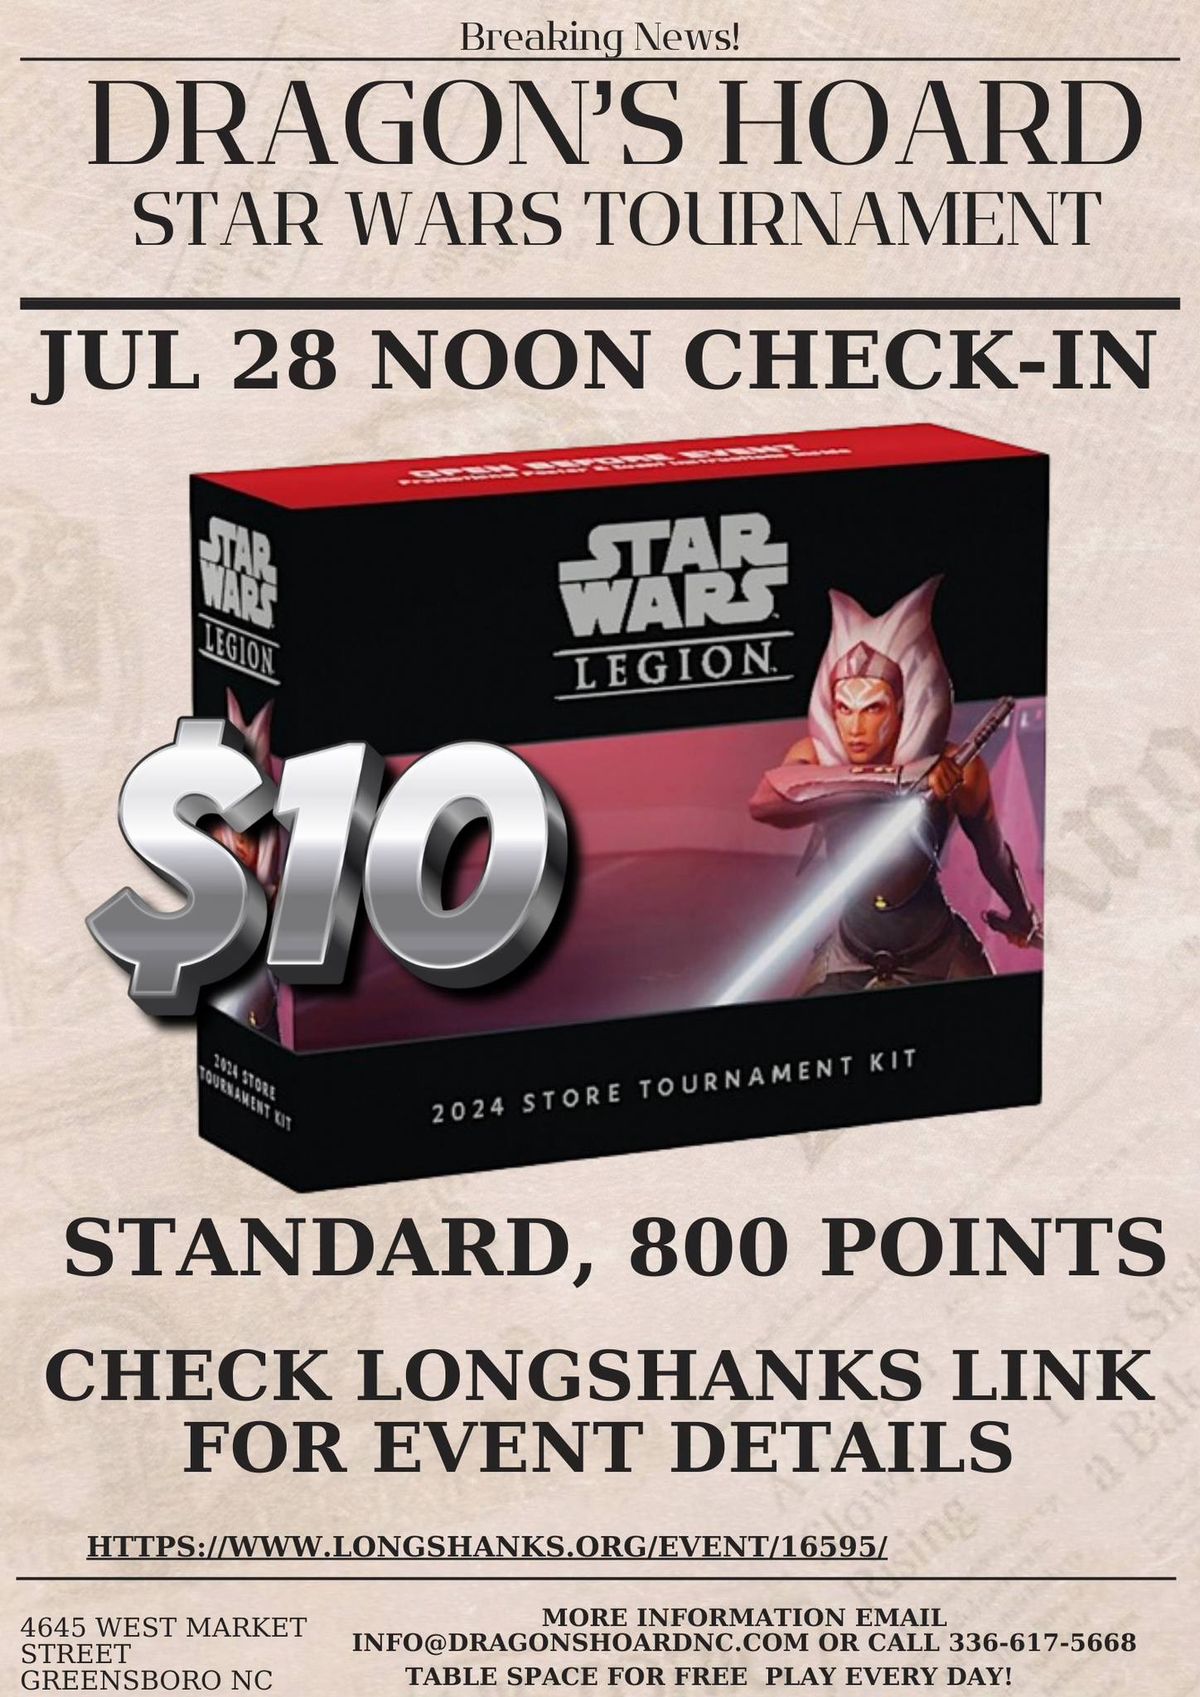 Star Wars Legion 2024 Store Tournament at Dragon's Hoard July 28 Noon